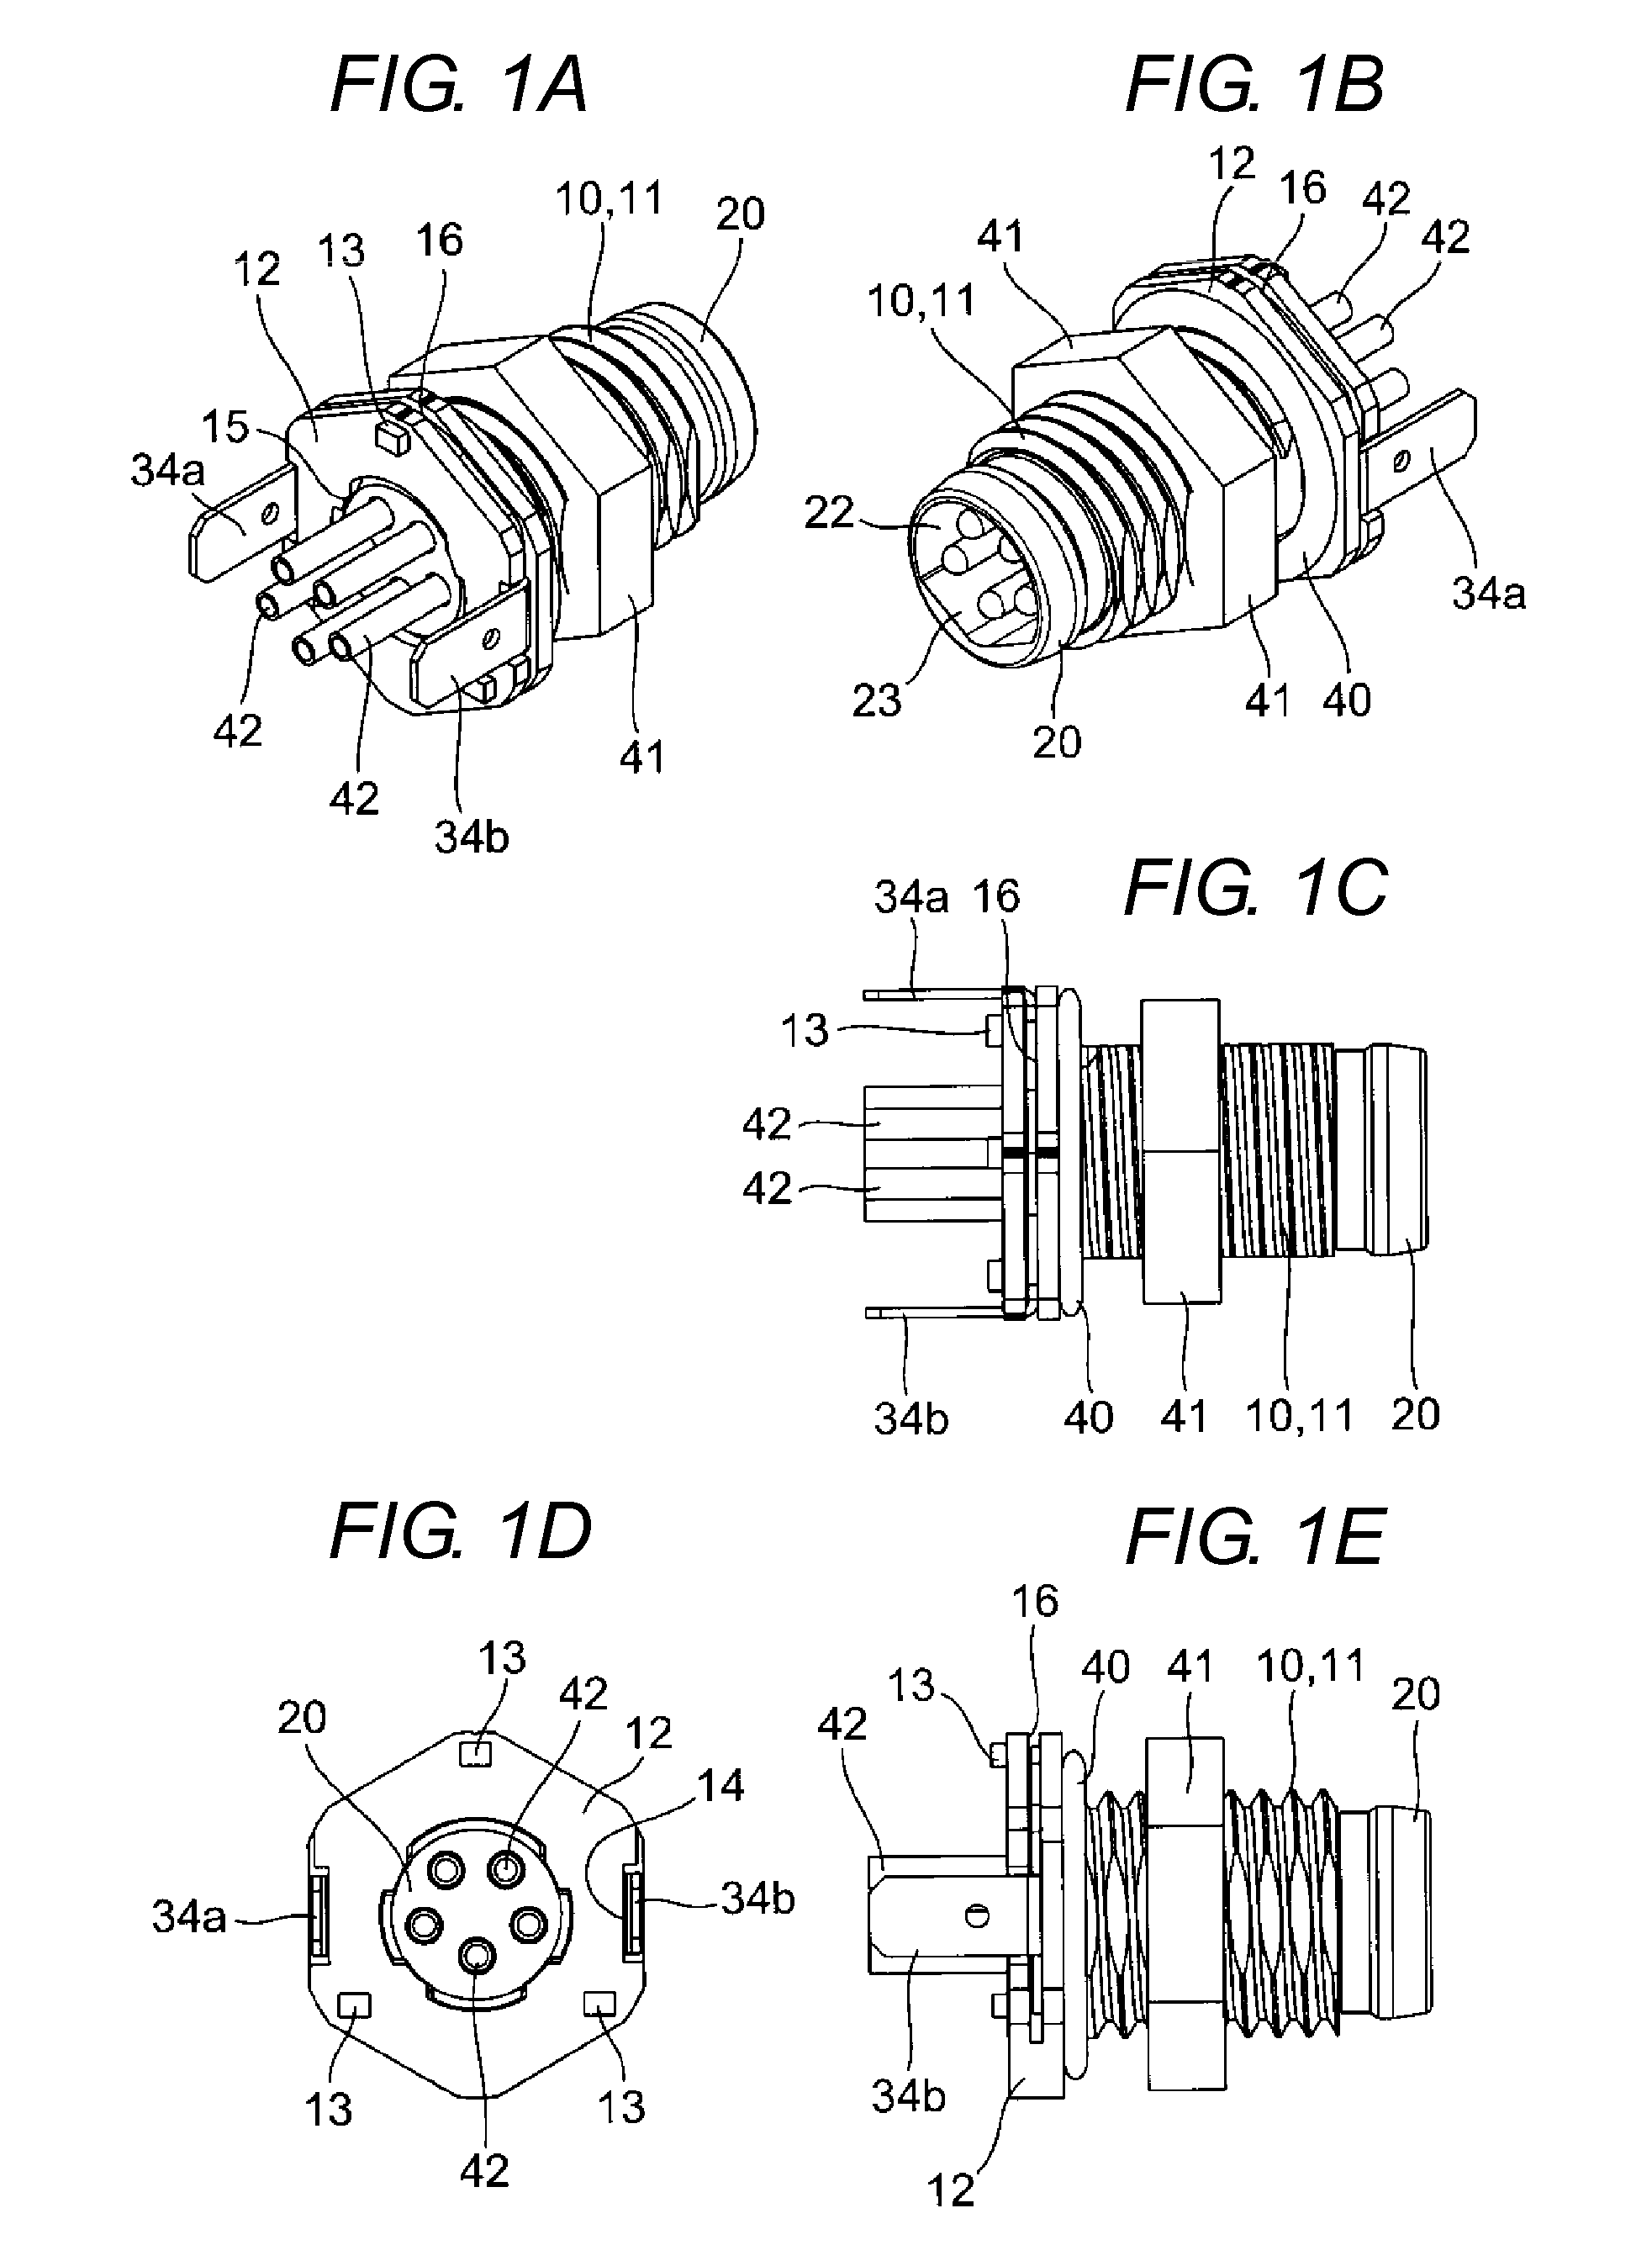 Ground terminal and connector provided therewith